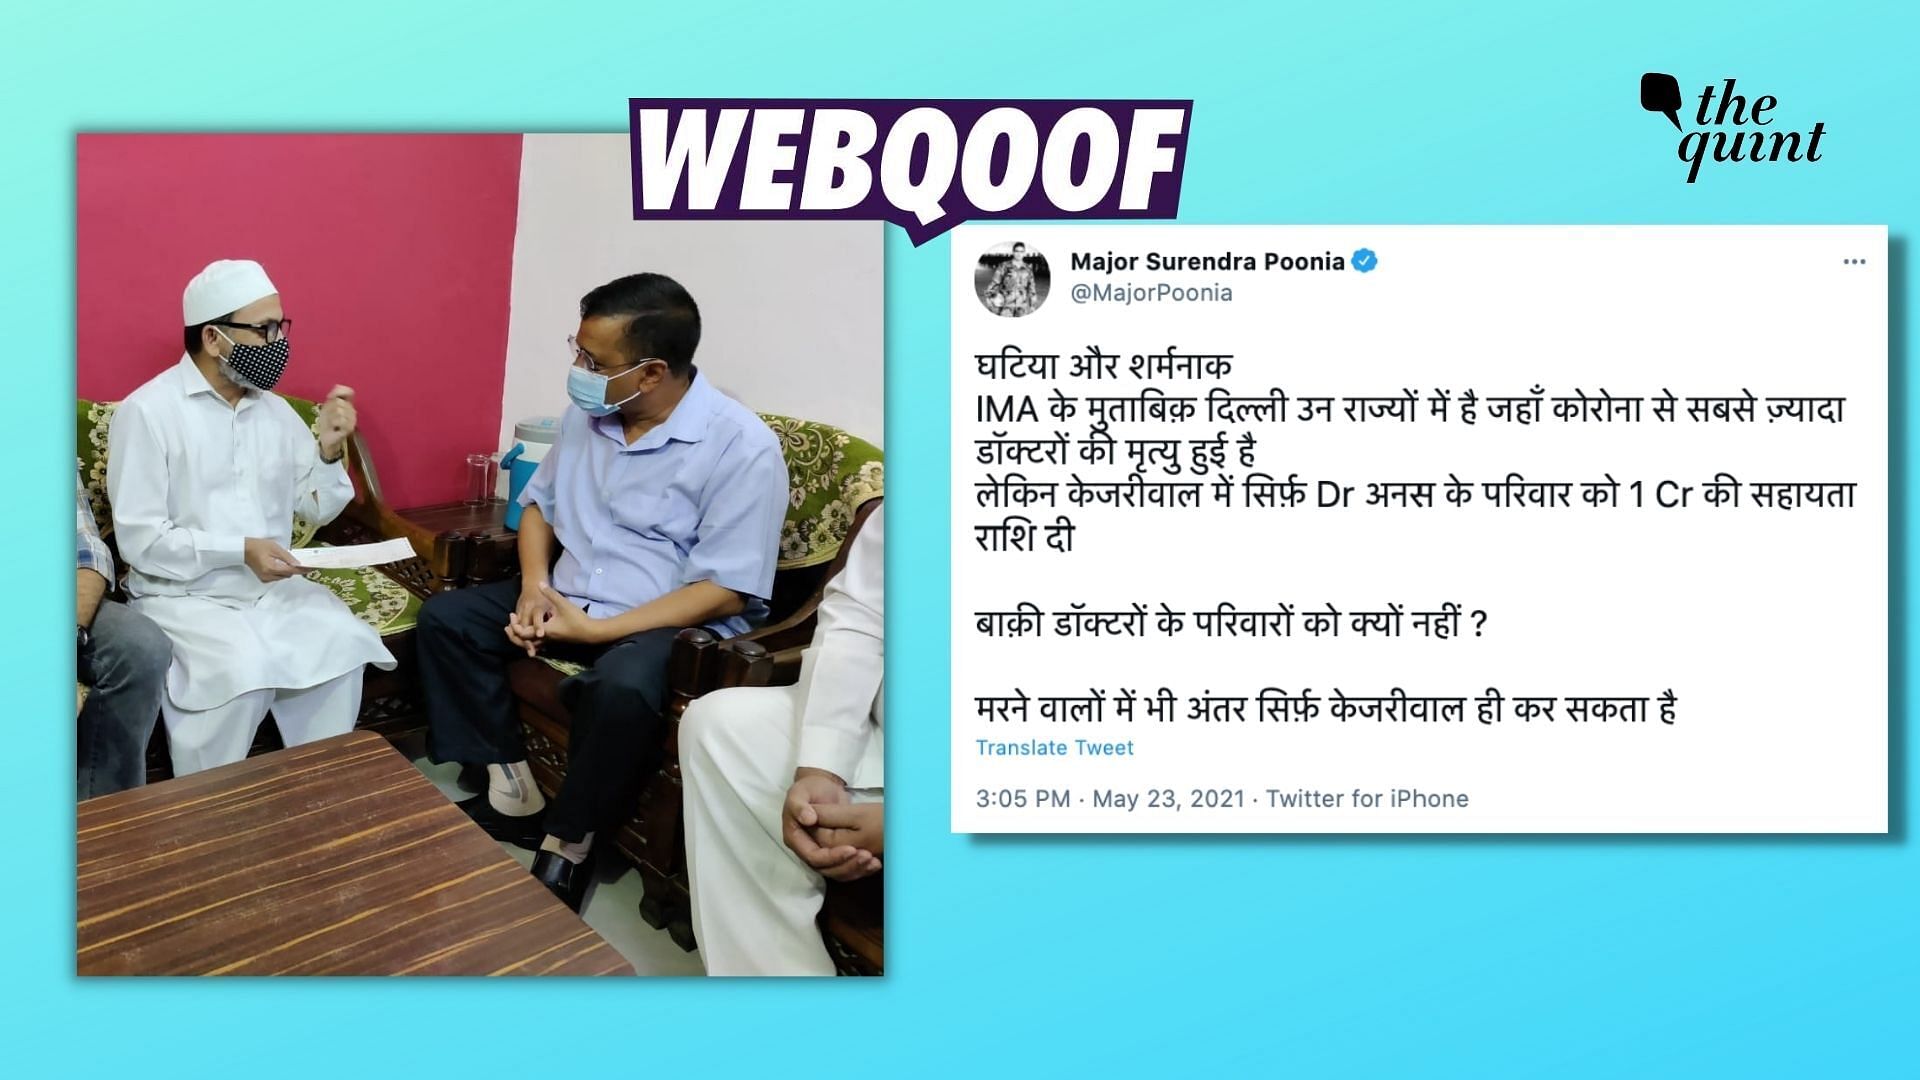 Several social media users claimed that the AAP government gave Rs 1-crore aid to only Dr Anas Mujahid’s family and not to those of other COVID-19 warriors.